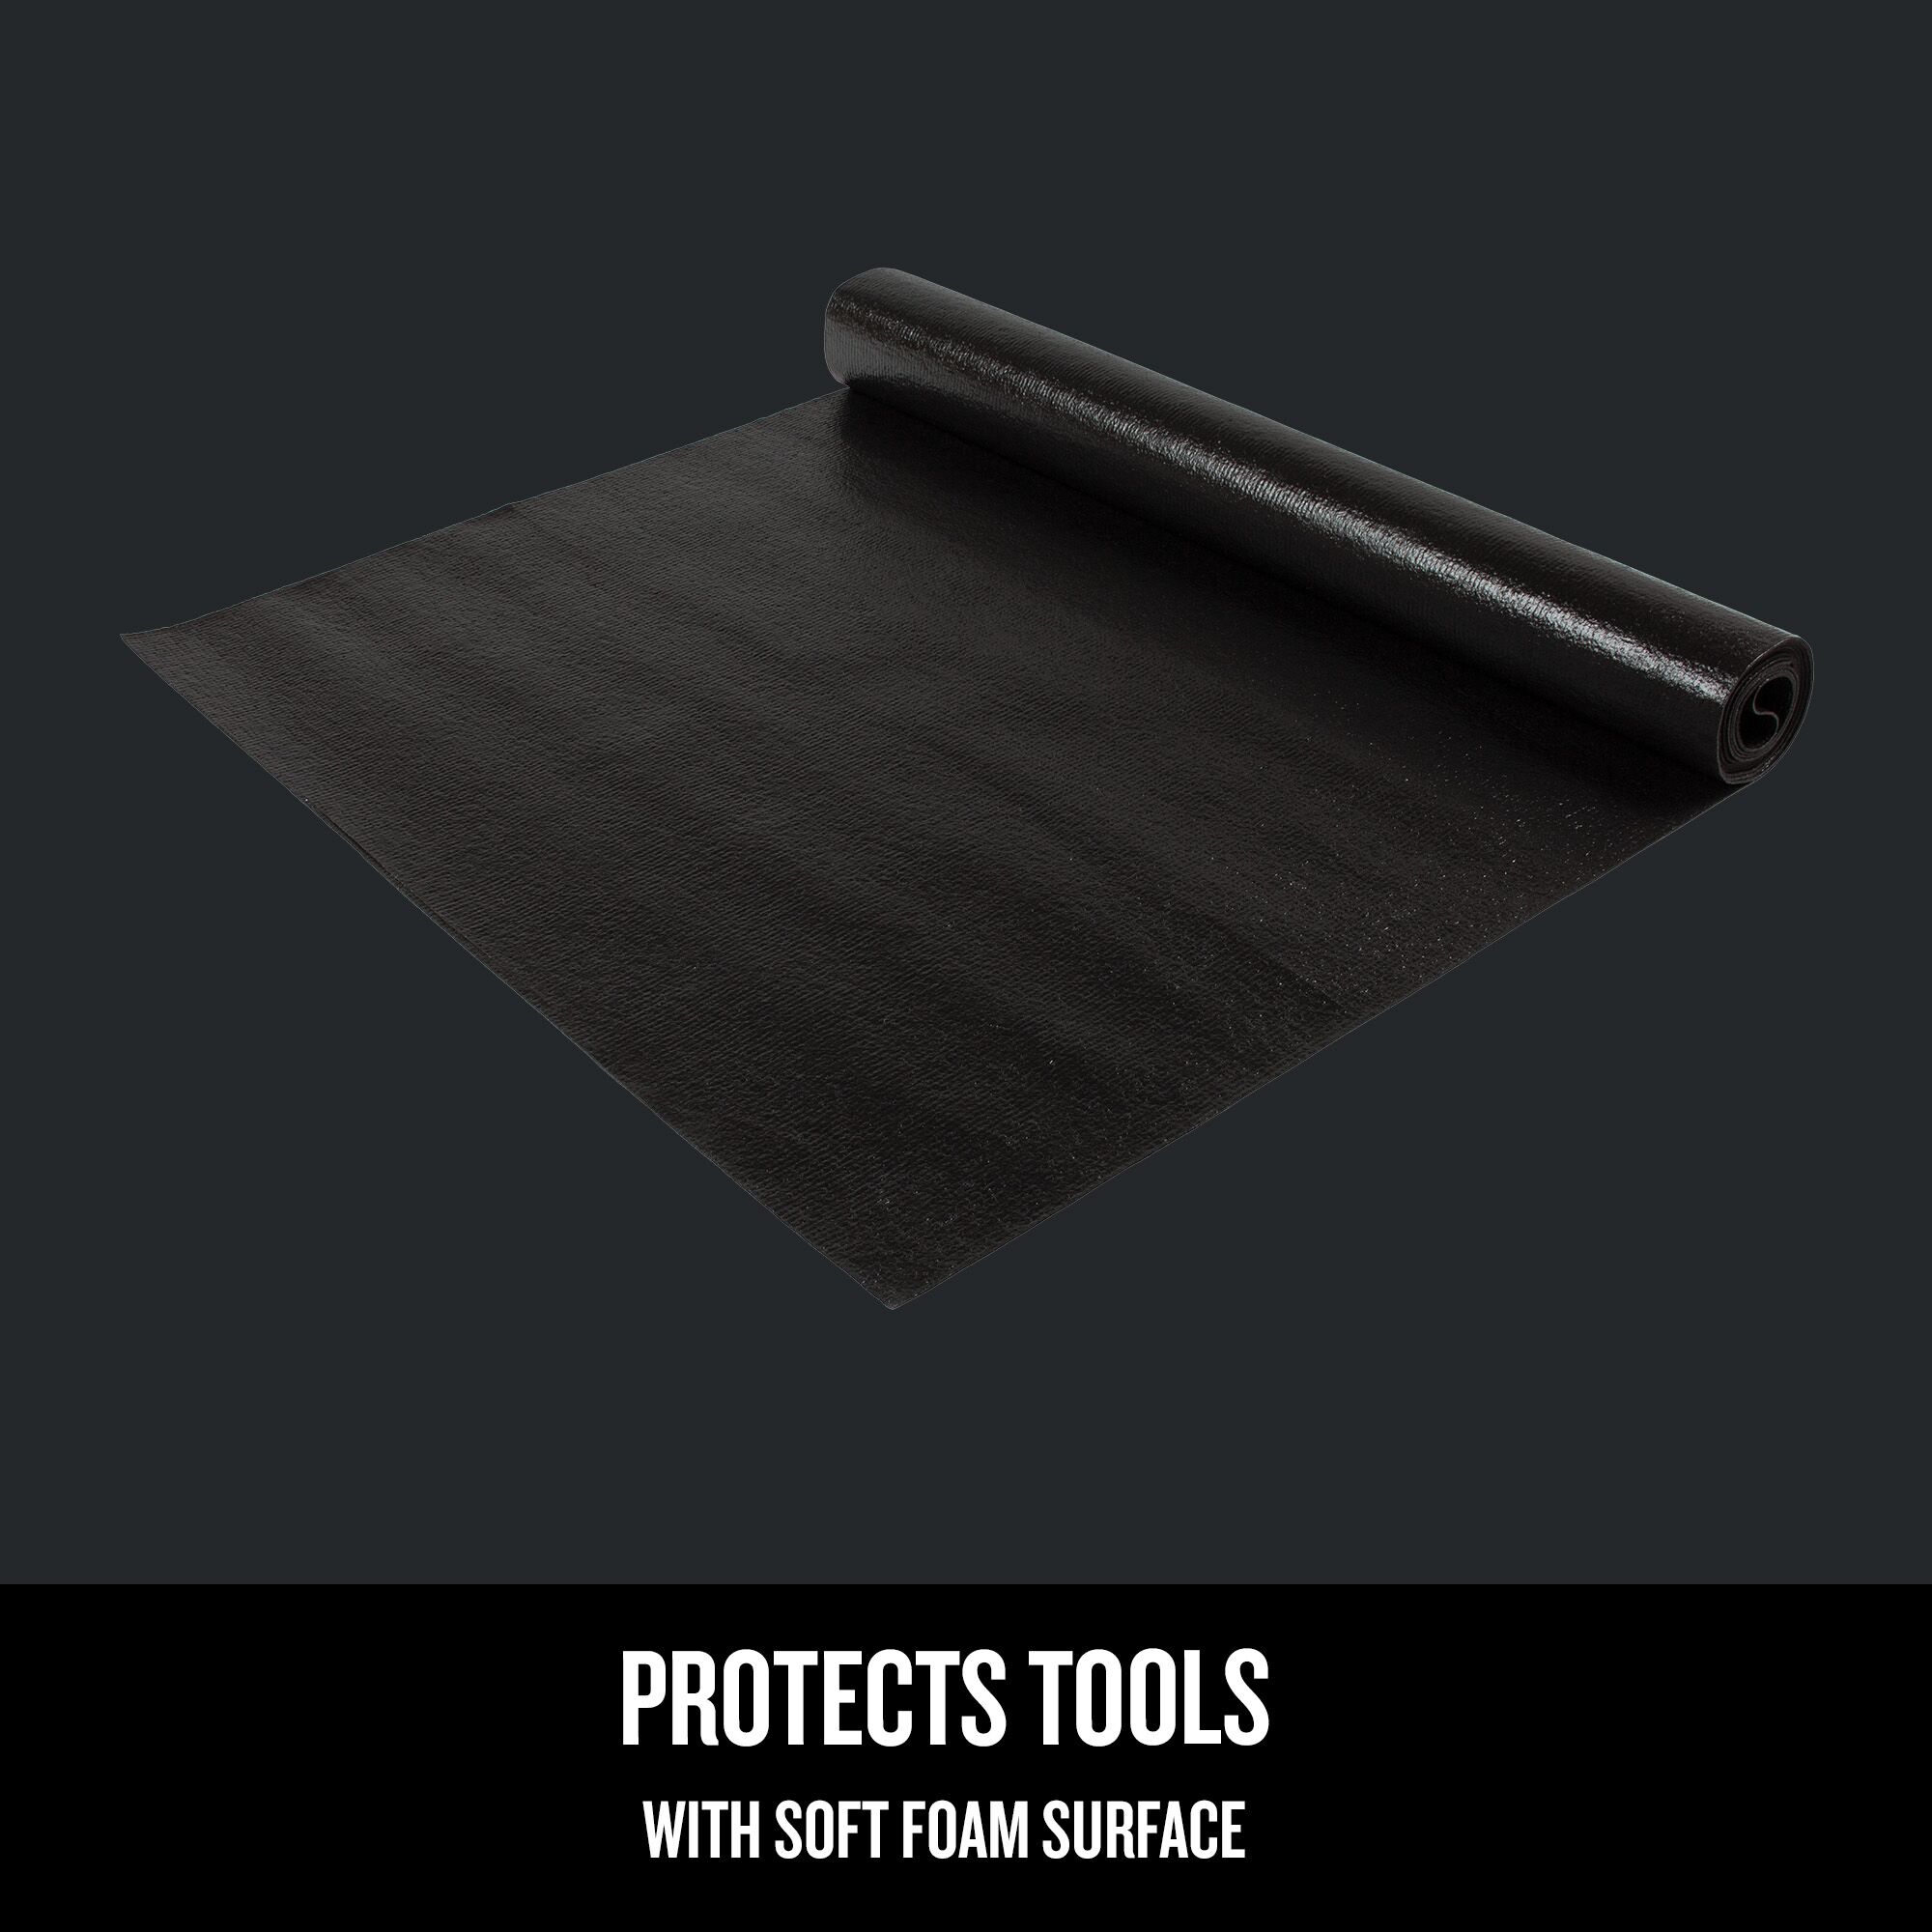 Protects tools with soft foam surface